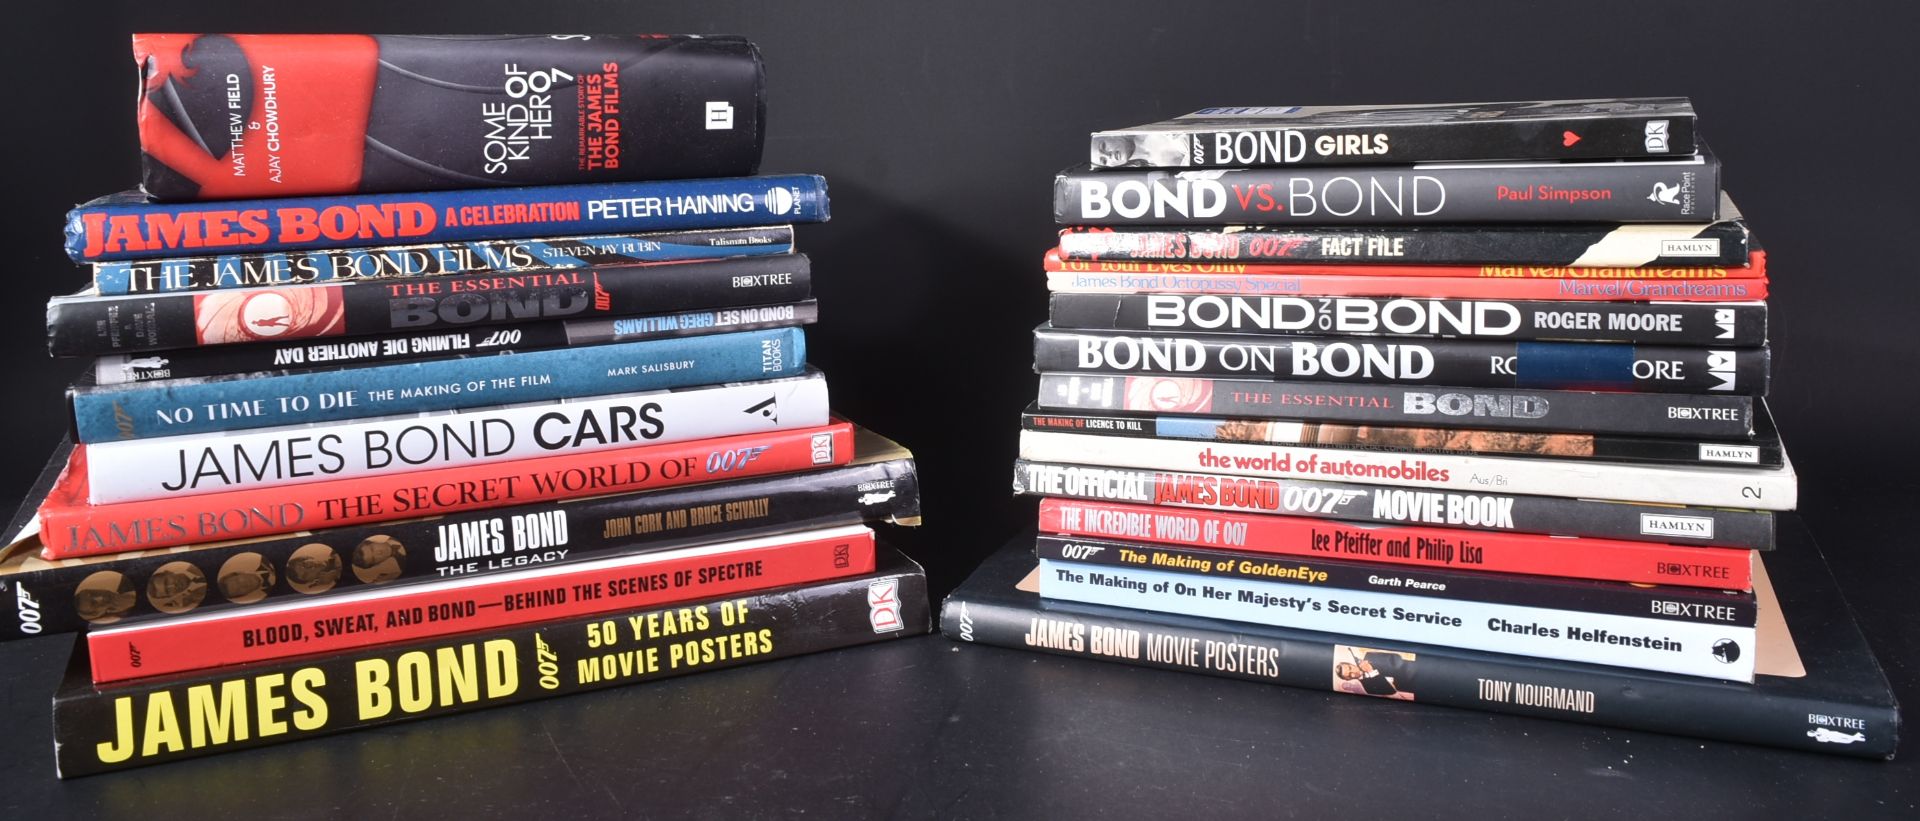 JAMES BOND - COLLECTION OF HARDBACK RELATED BOOKS - Image 2 of 6